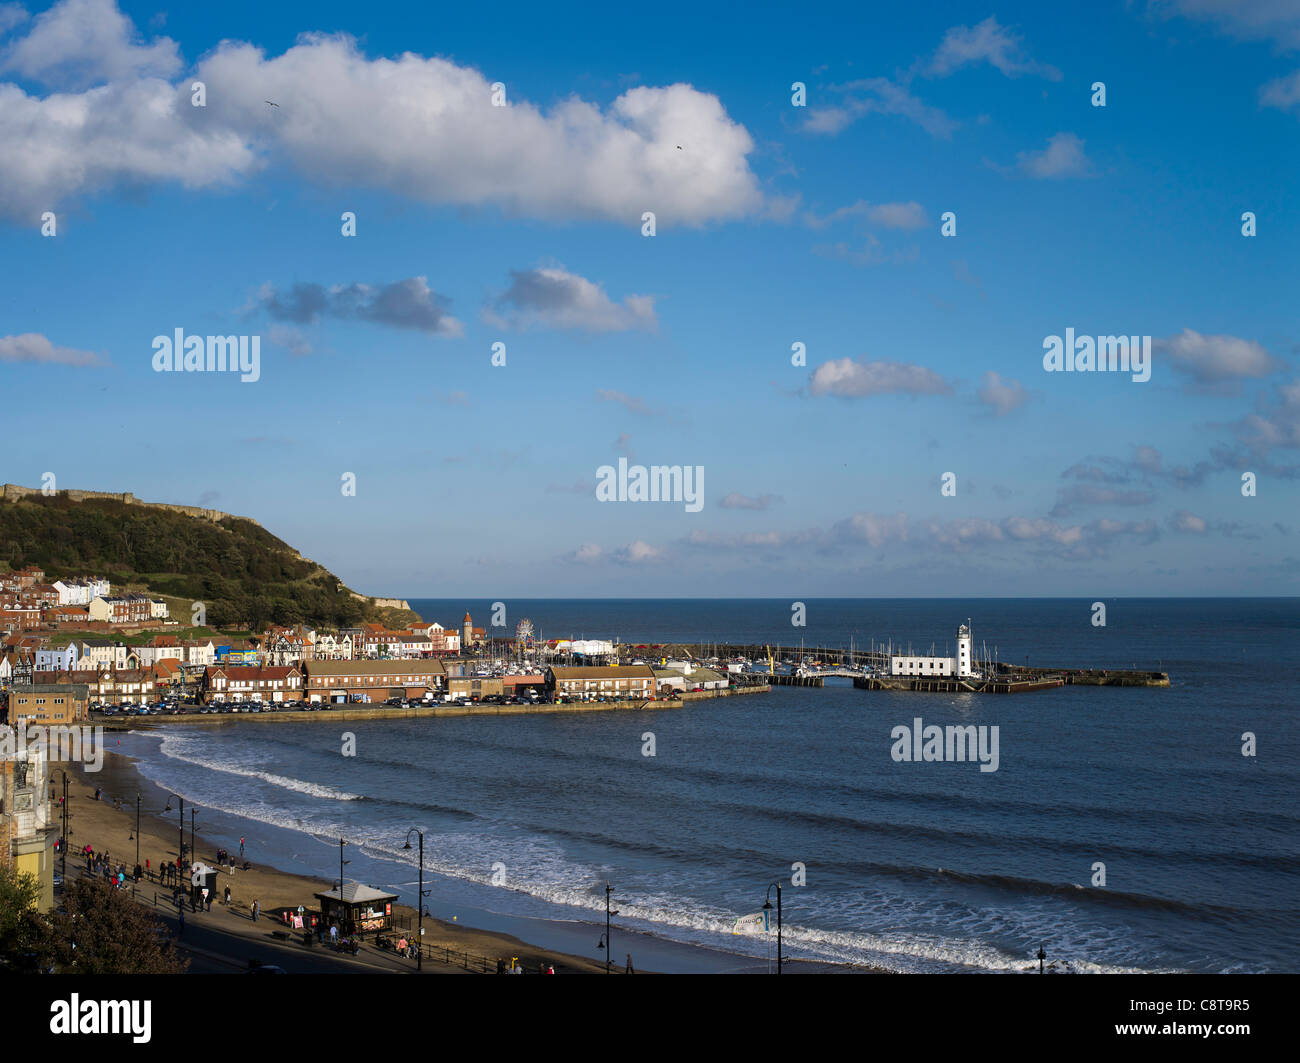 dh South Bay harbour SCARBOROUGH NORTH YORKSHIRE Seaside town beach sea uk Stock Photo